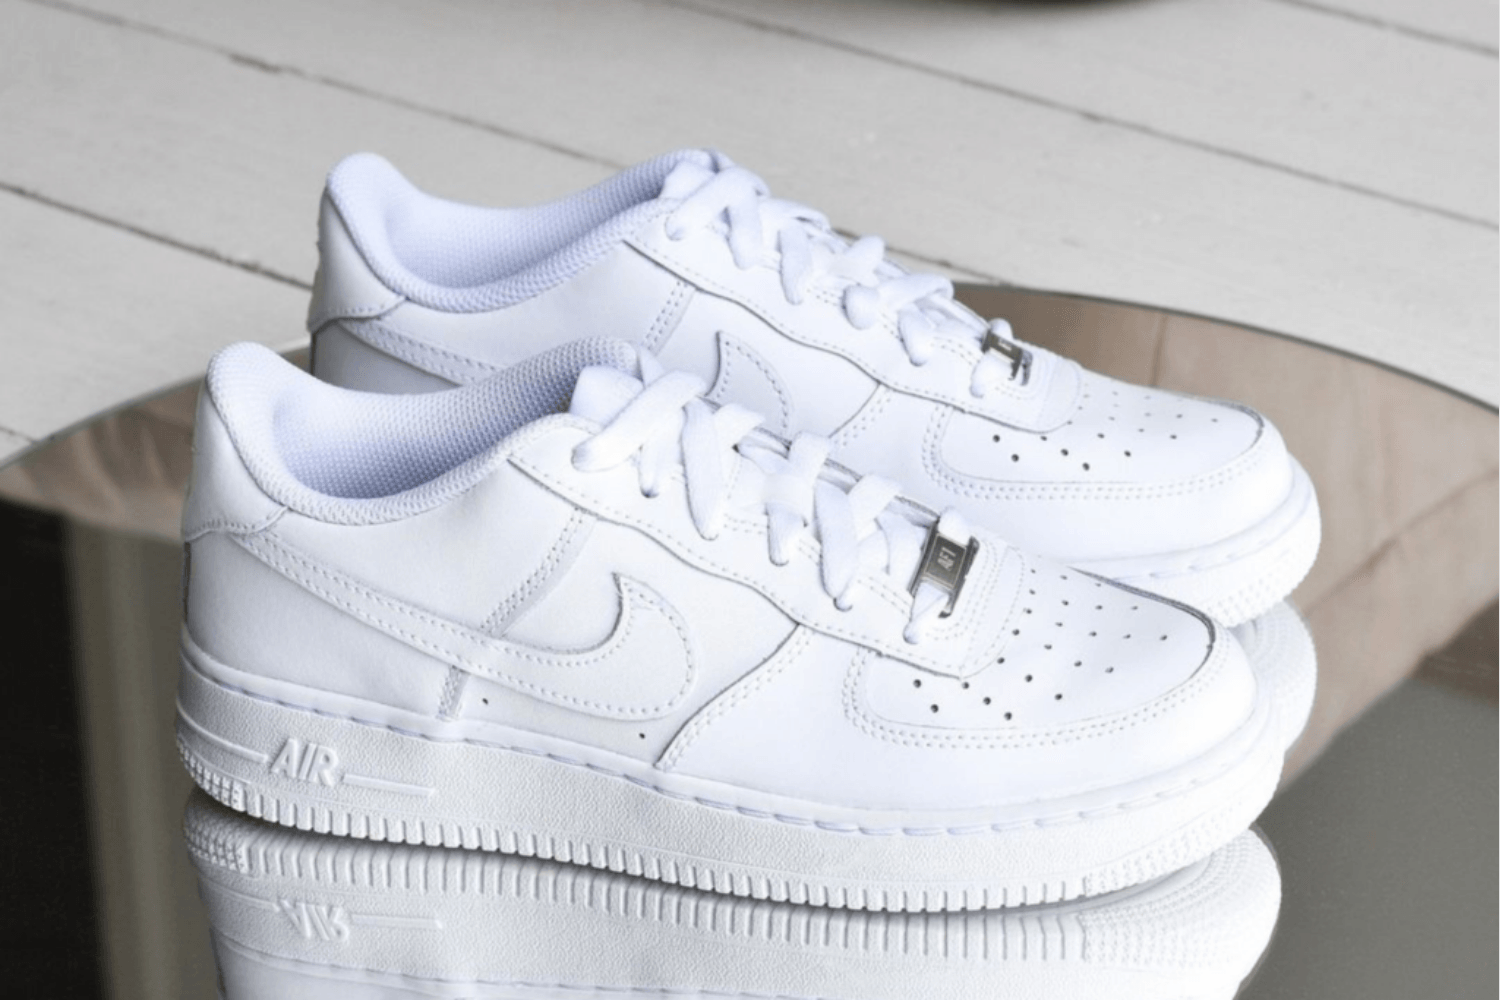 Air Force 1 Trend Styles und Festival Must-haves bei Sidestep